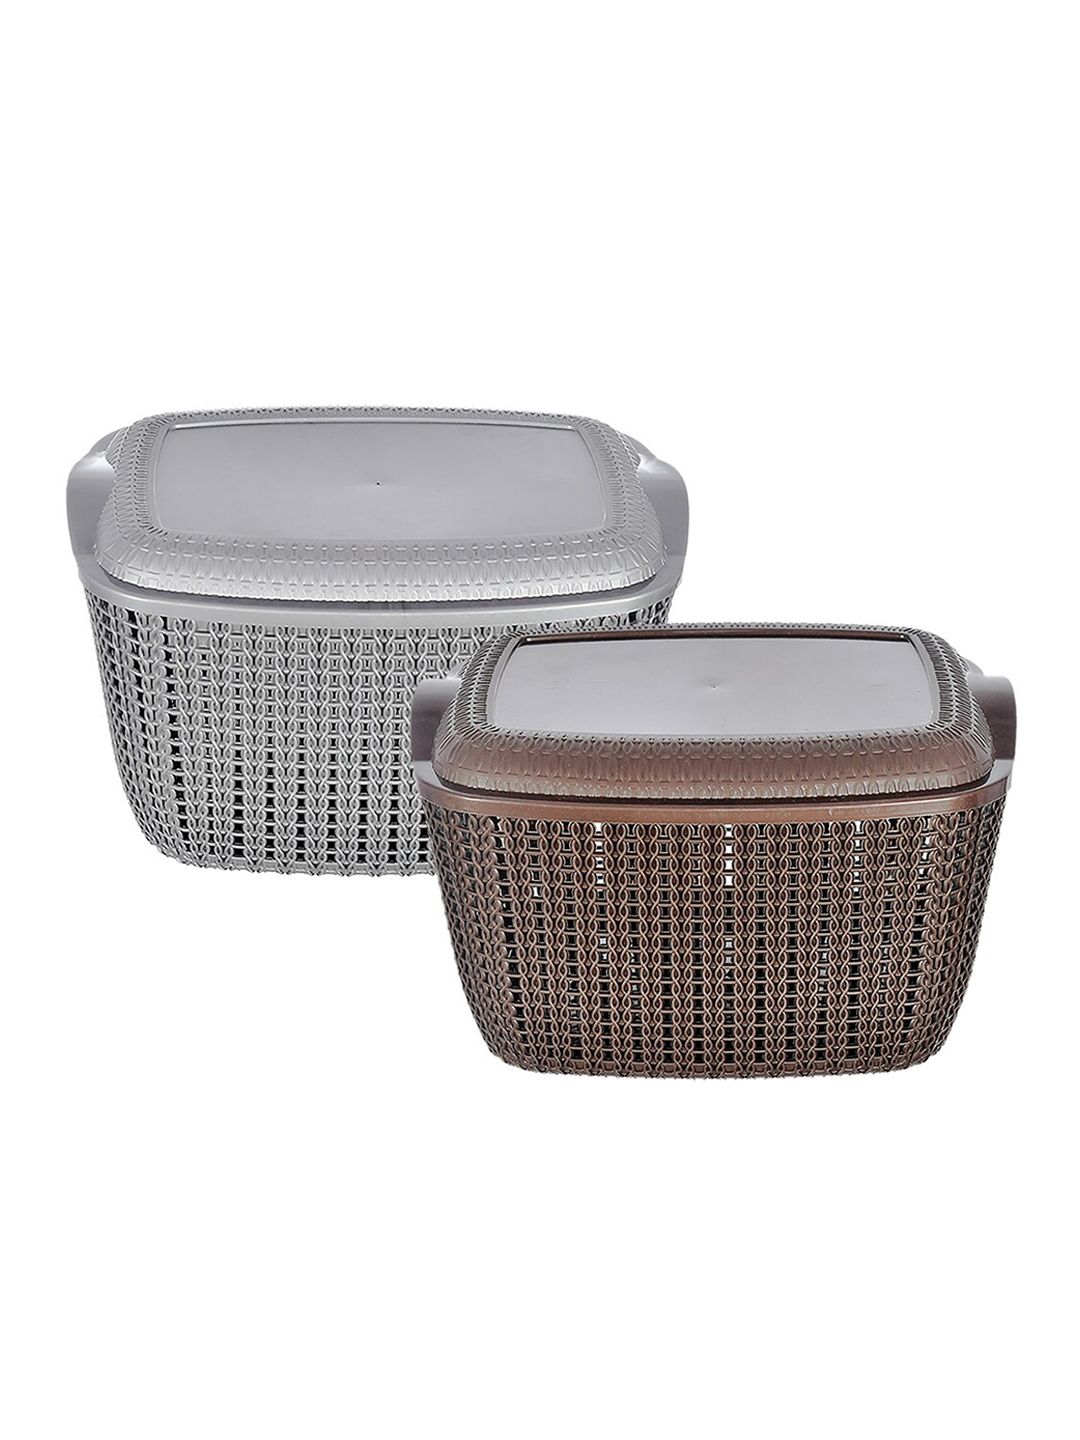 Kuber Industries Set Of 2 Grey & Brown Textured Plastic Baskets With Lids Price in India